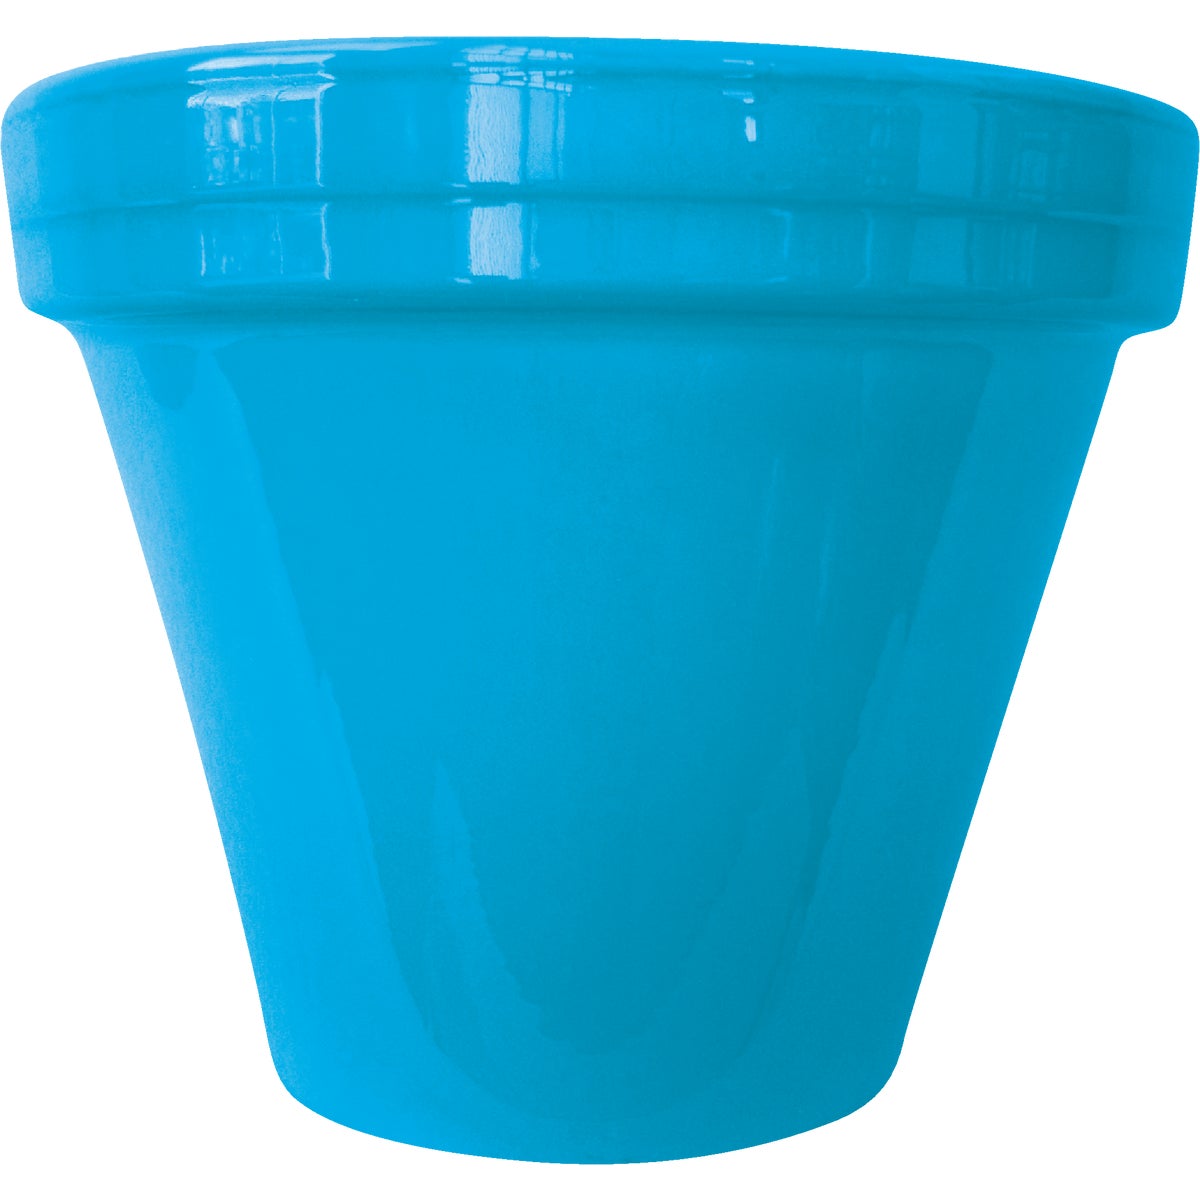 Item 705298, Spring Fever powder coated standard clay flower pot with drainage hole.